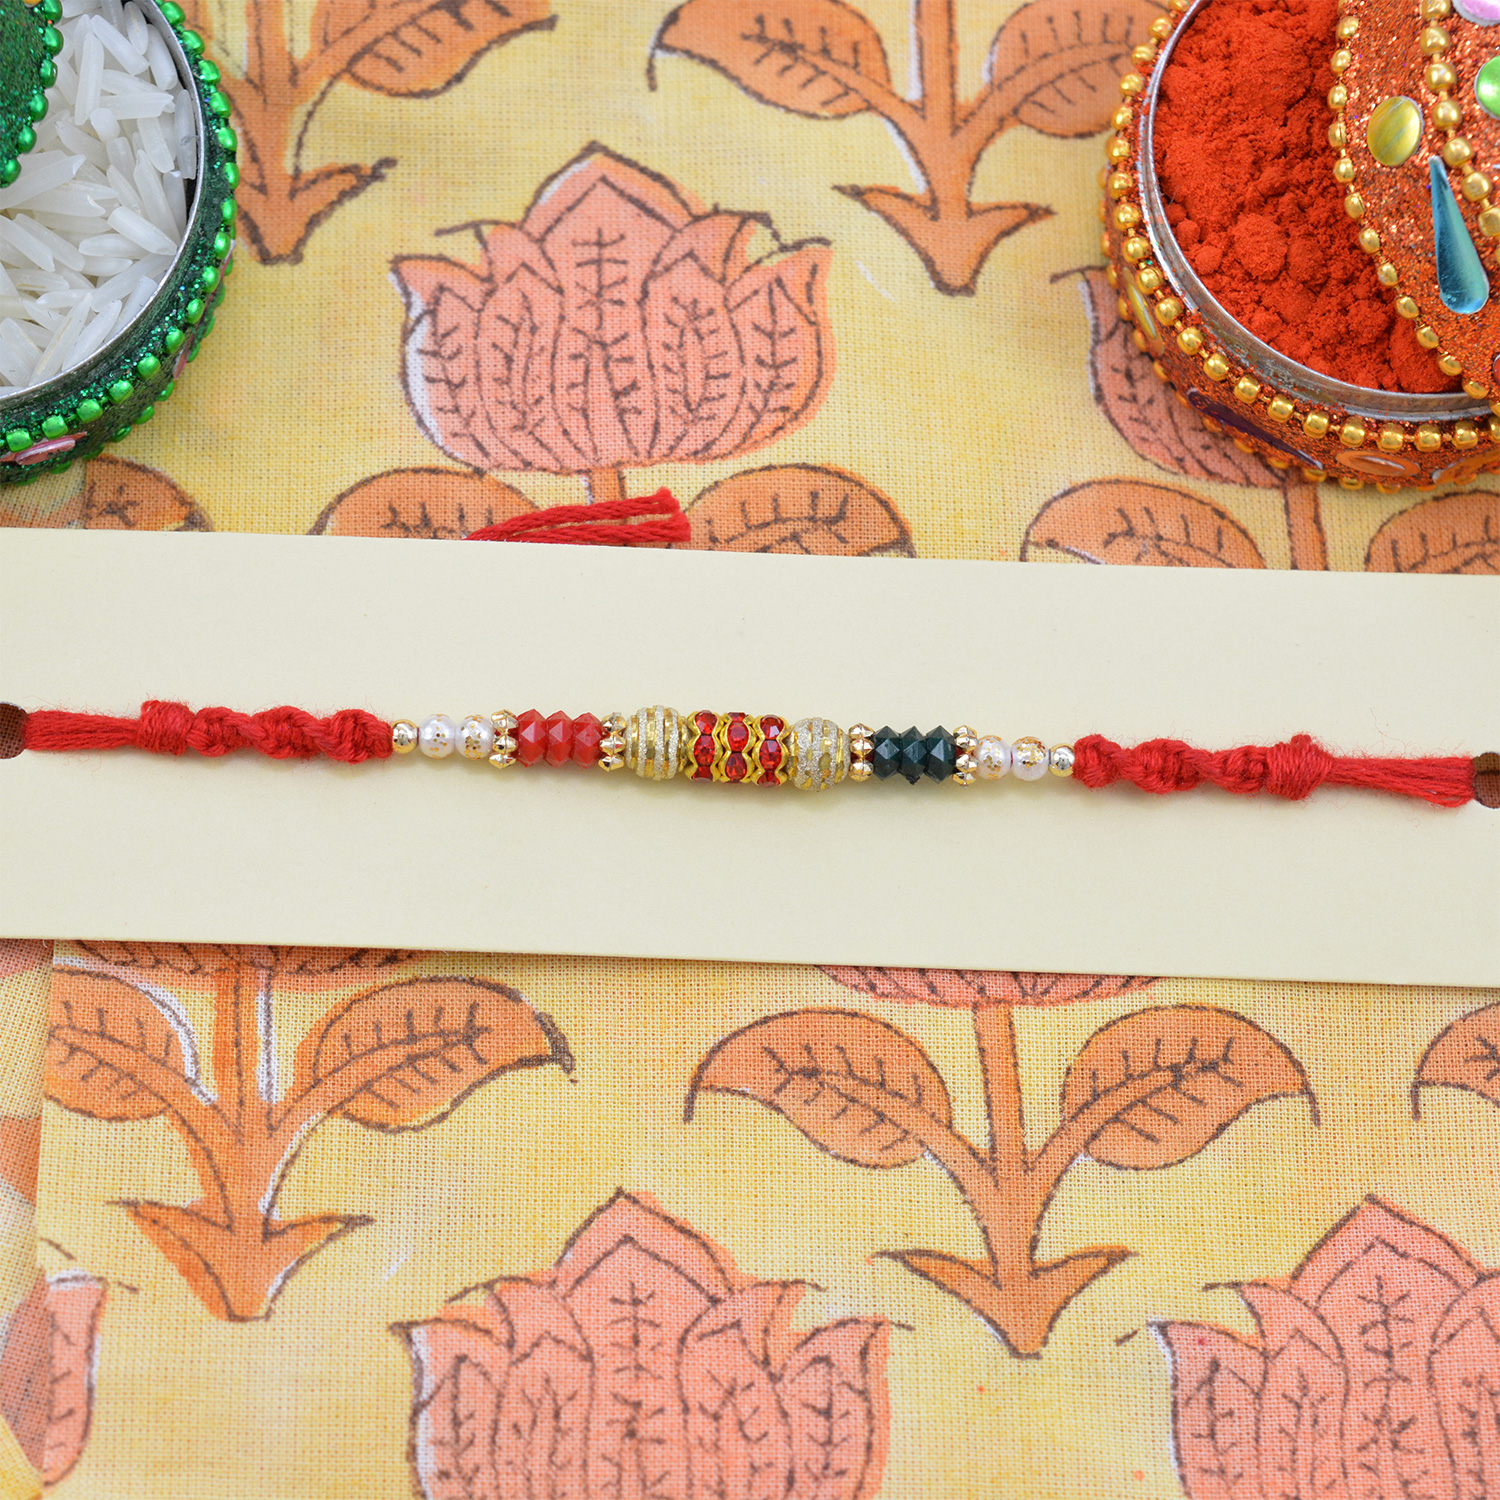 Red, White and Black Color Beads with Red Jewel Rakhi